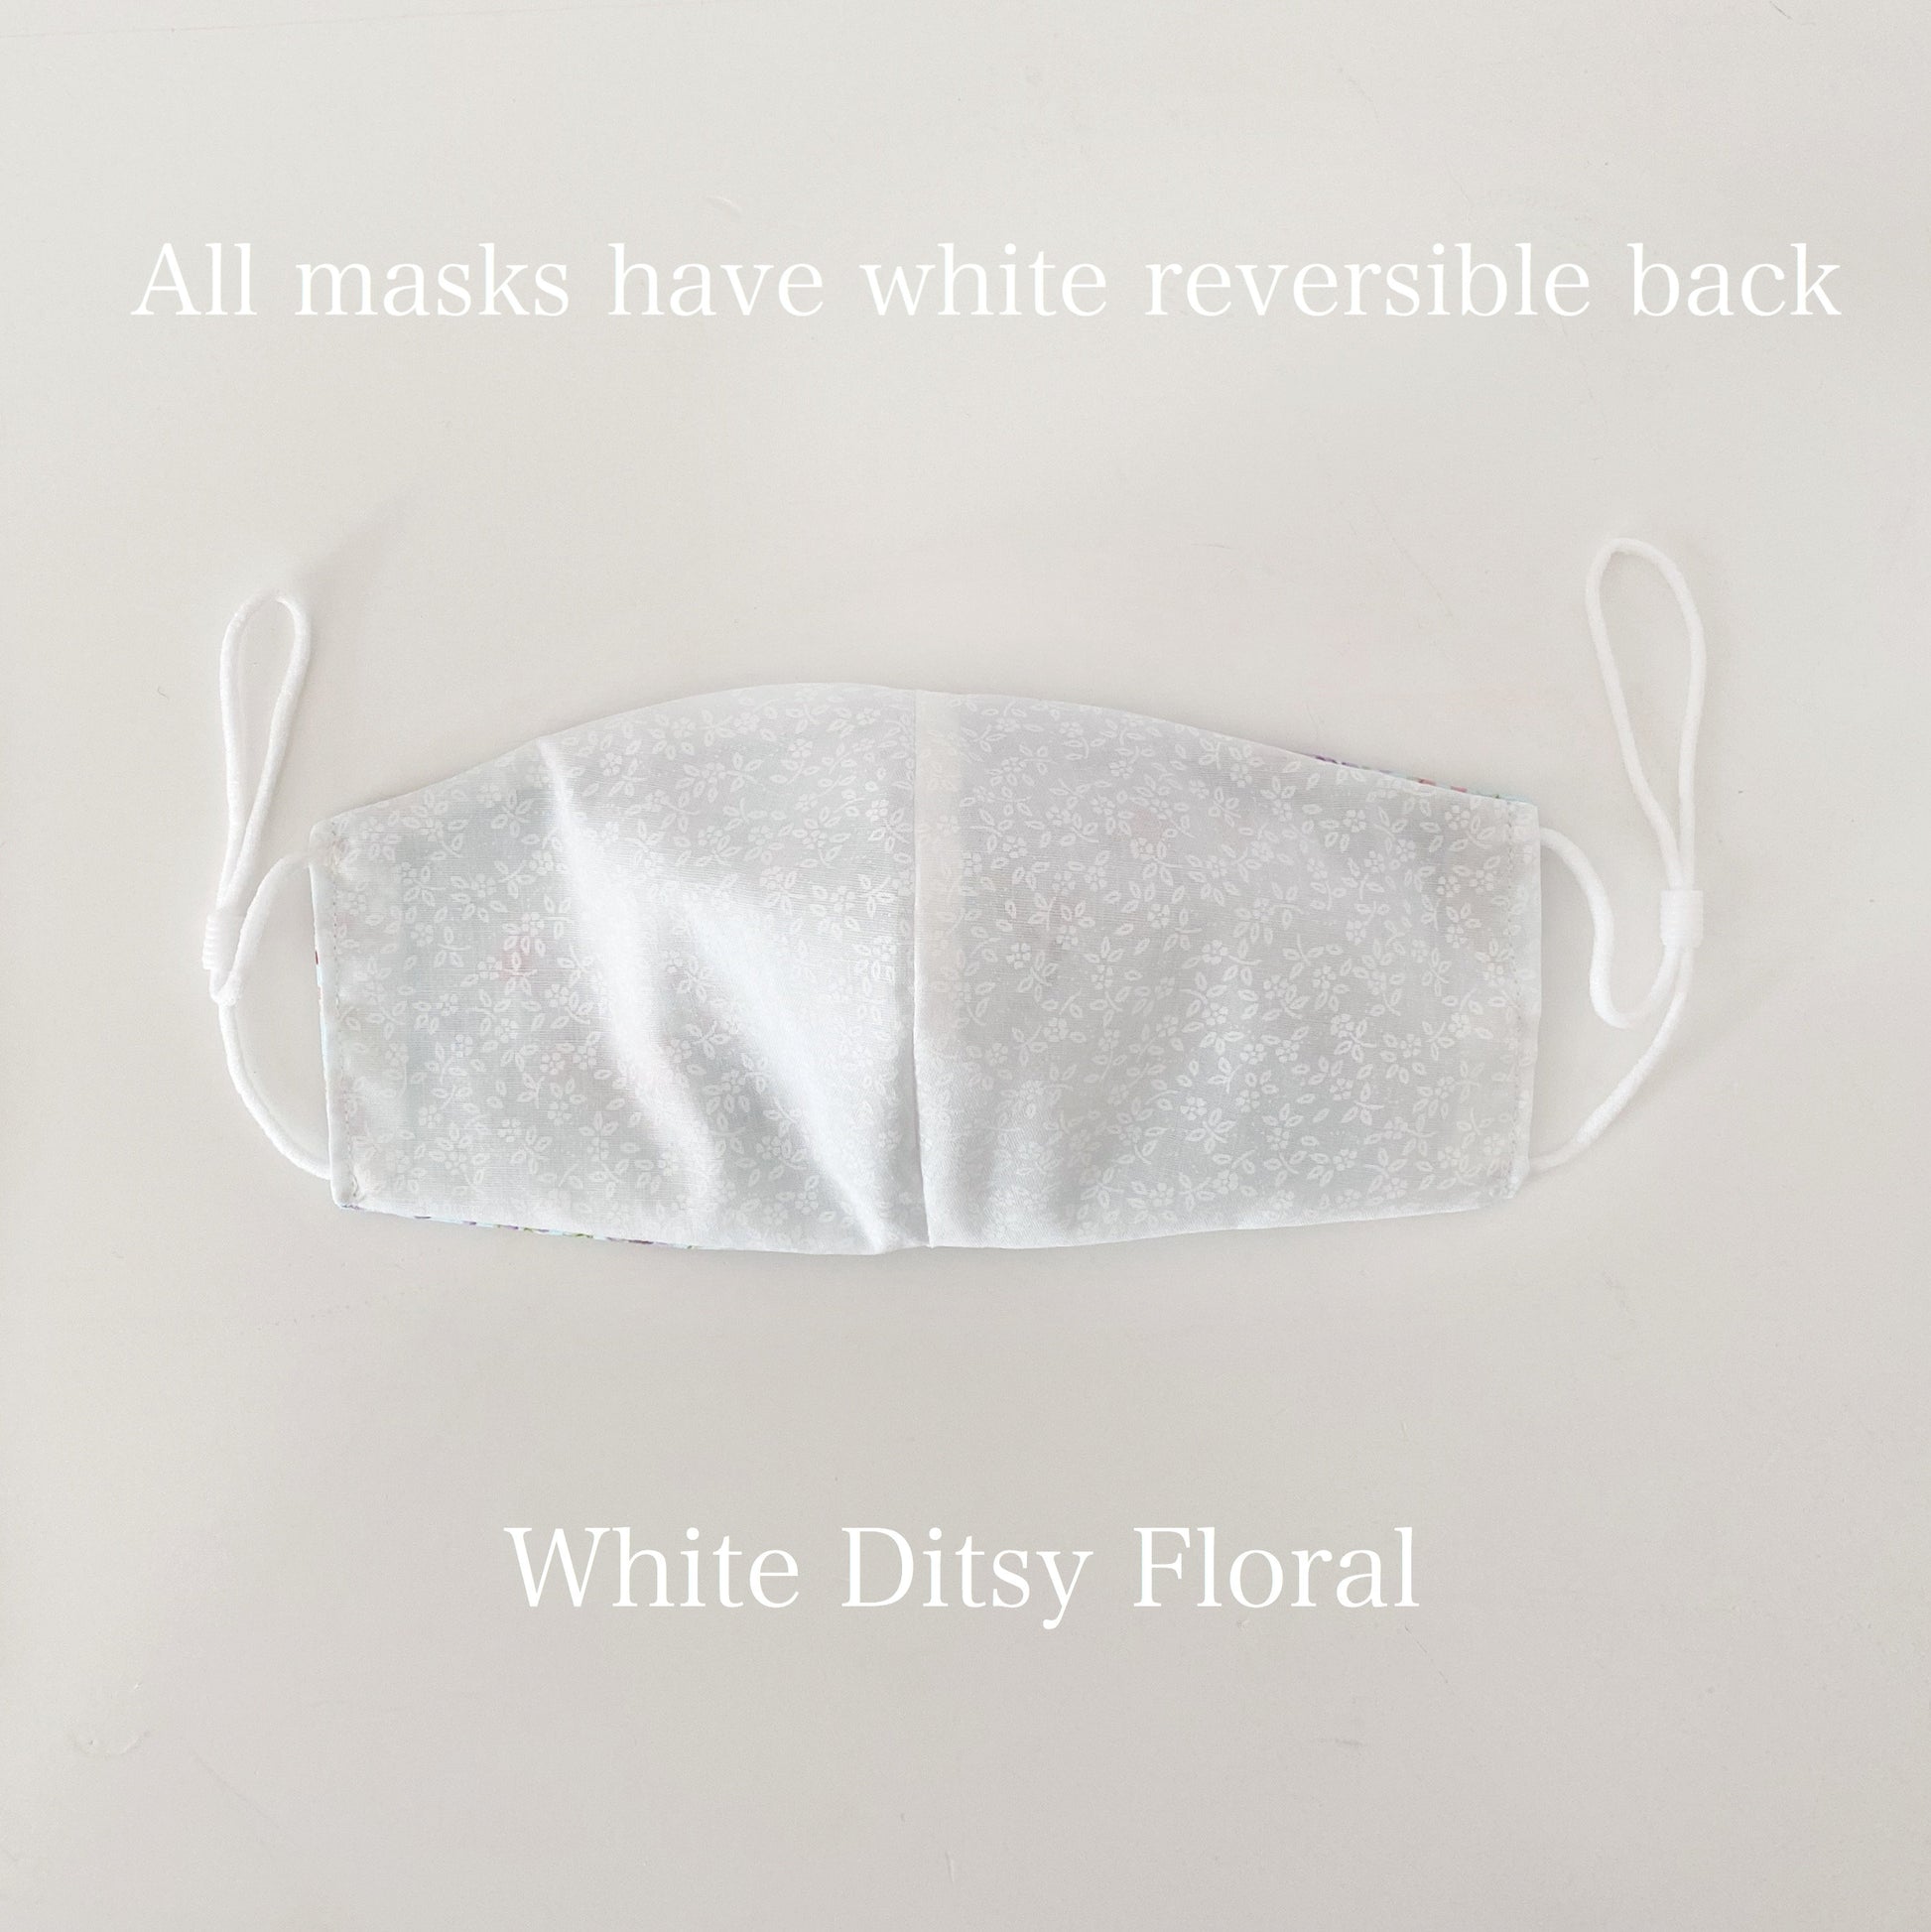 PRETTY FLORAL REVERSIBLE 2 in 1 Mask Adjustable Super Soft Elastic. Washable Reusable homemade face masks Double layer cotton made in U.K.